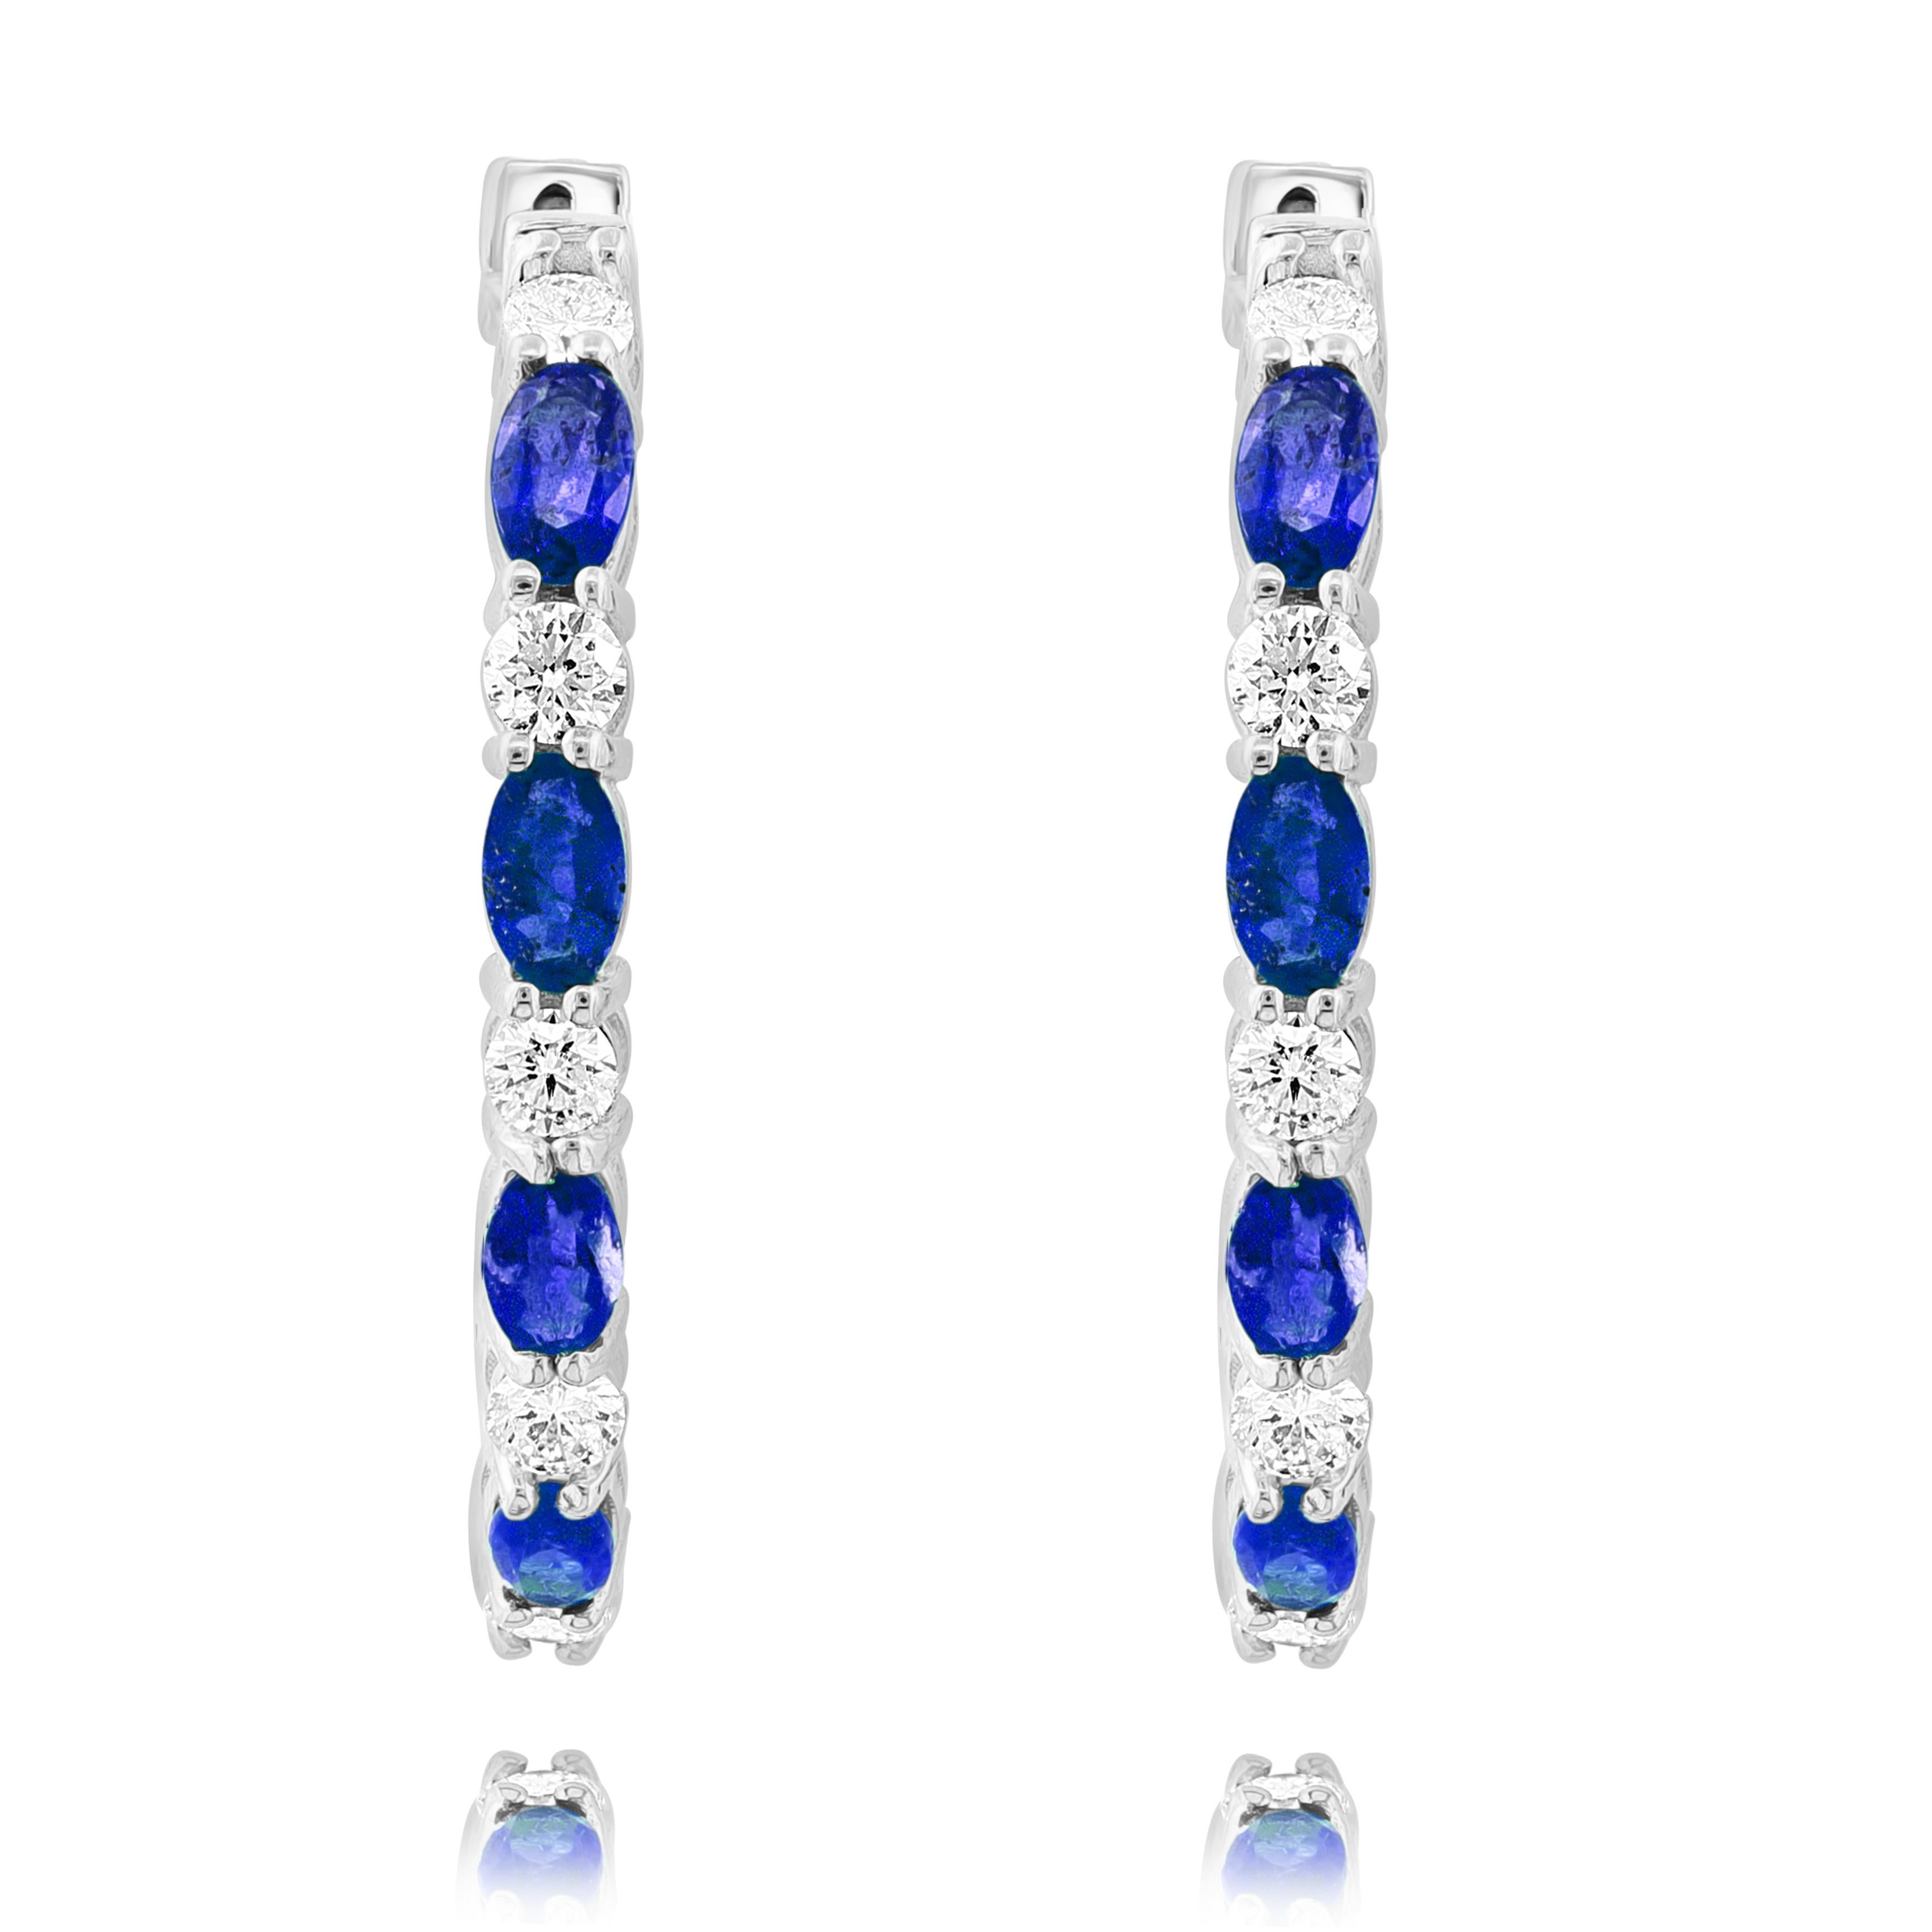 A stylish and versatile style hoop earring showcasing oval cut 14 blue sapphires weighing 4.13 carats total, channel set in a diamond-encrusted 14-karat White gold mounting. 18 Diamonds weigh 1.79 carats in total.

All diamonds are GH color SI1